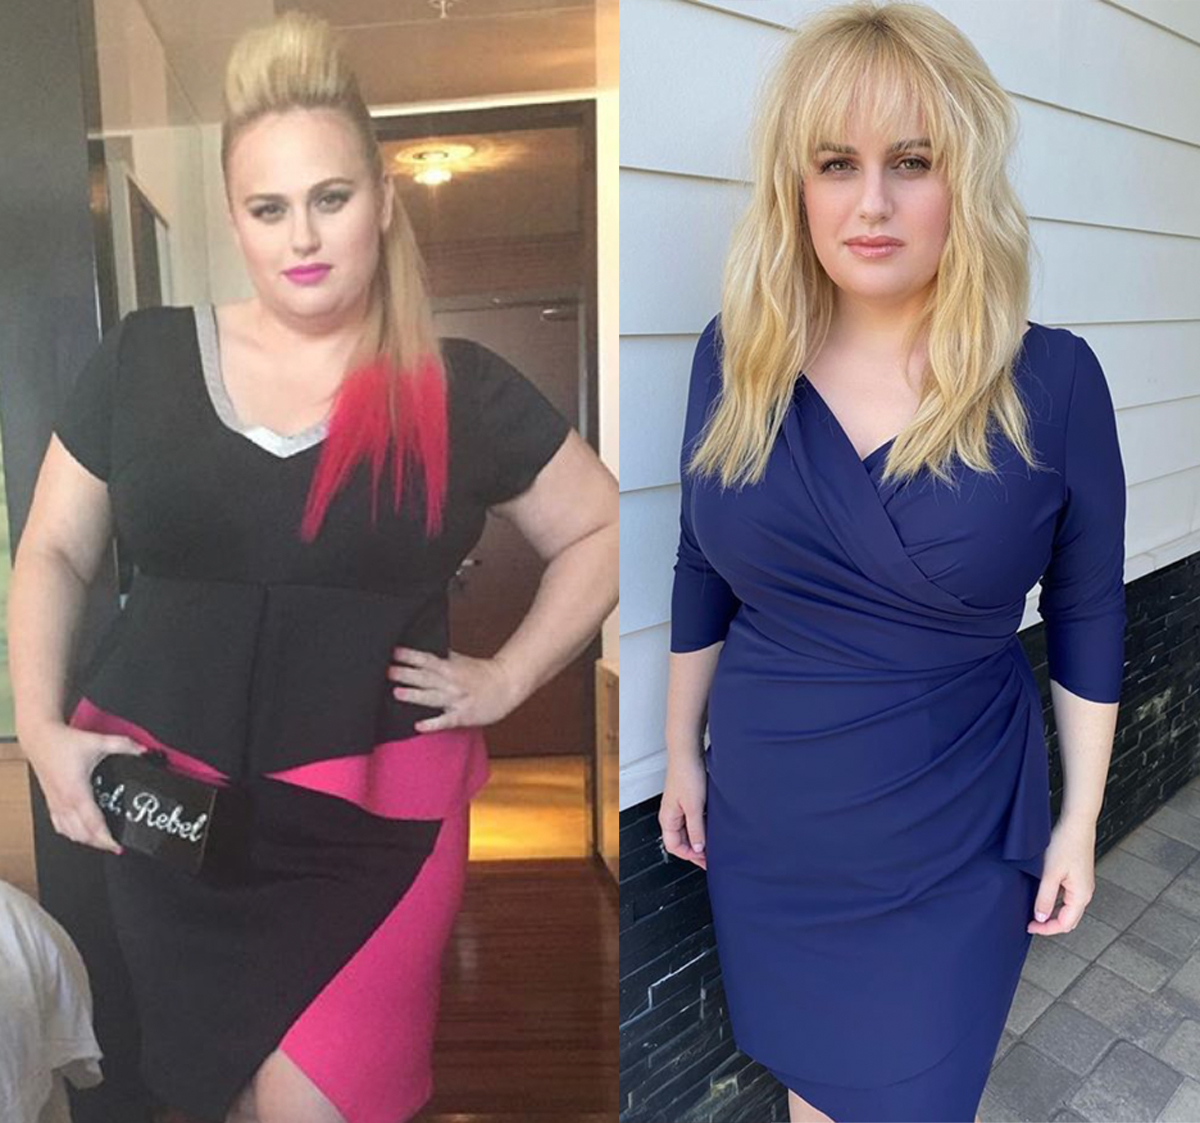 Rebel Wilson's health and fitness transformation has been nothing short of incredible to watch!